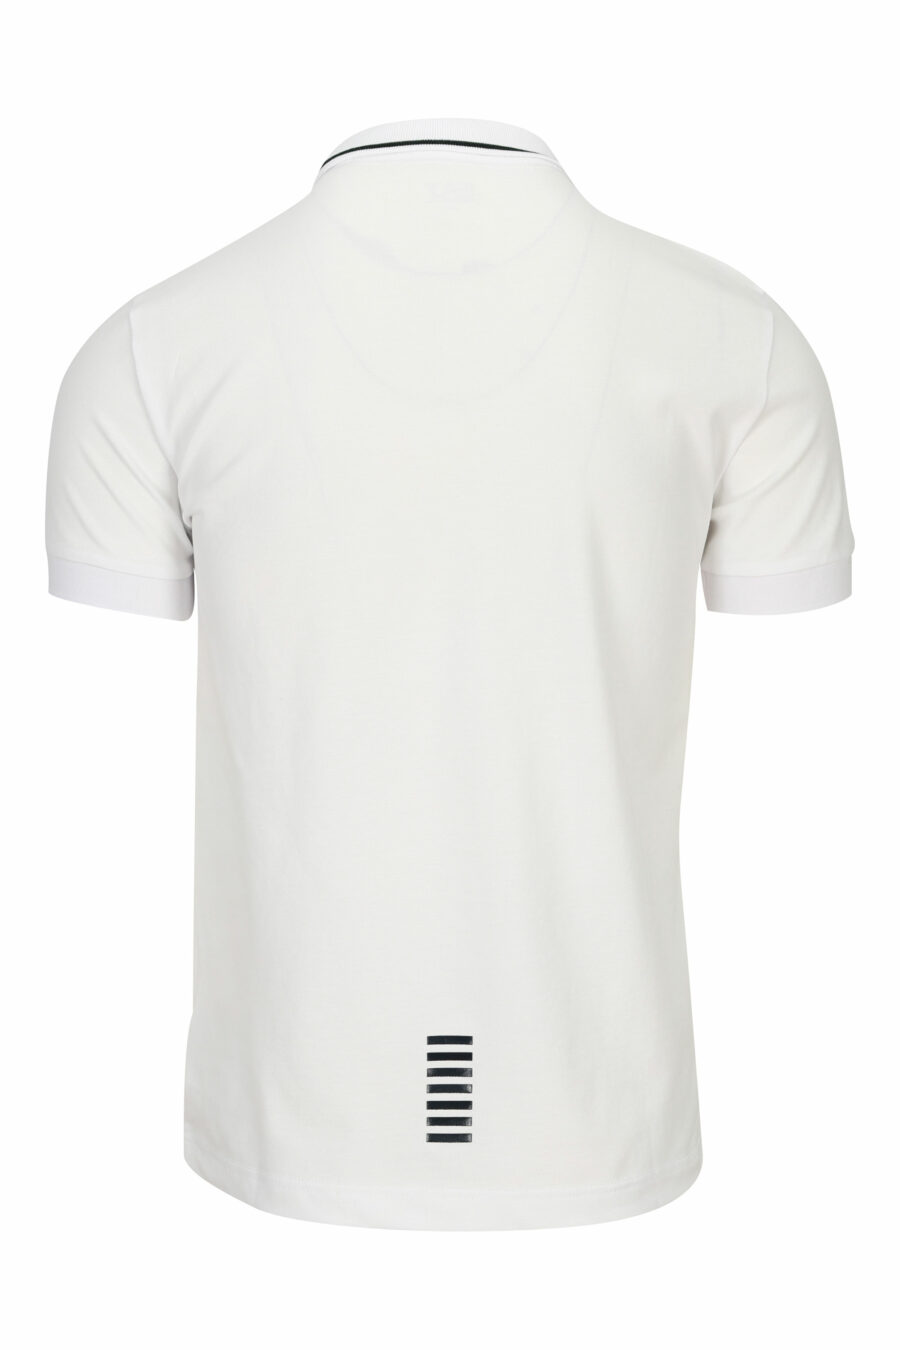 White polo shirt with "lux identity" minilogue and black lines on collar - 8055187161060 1